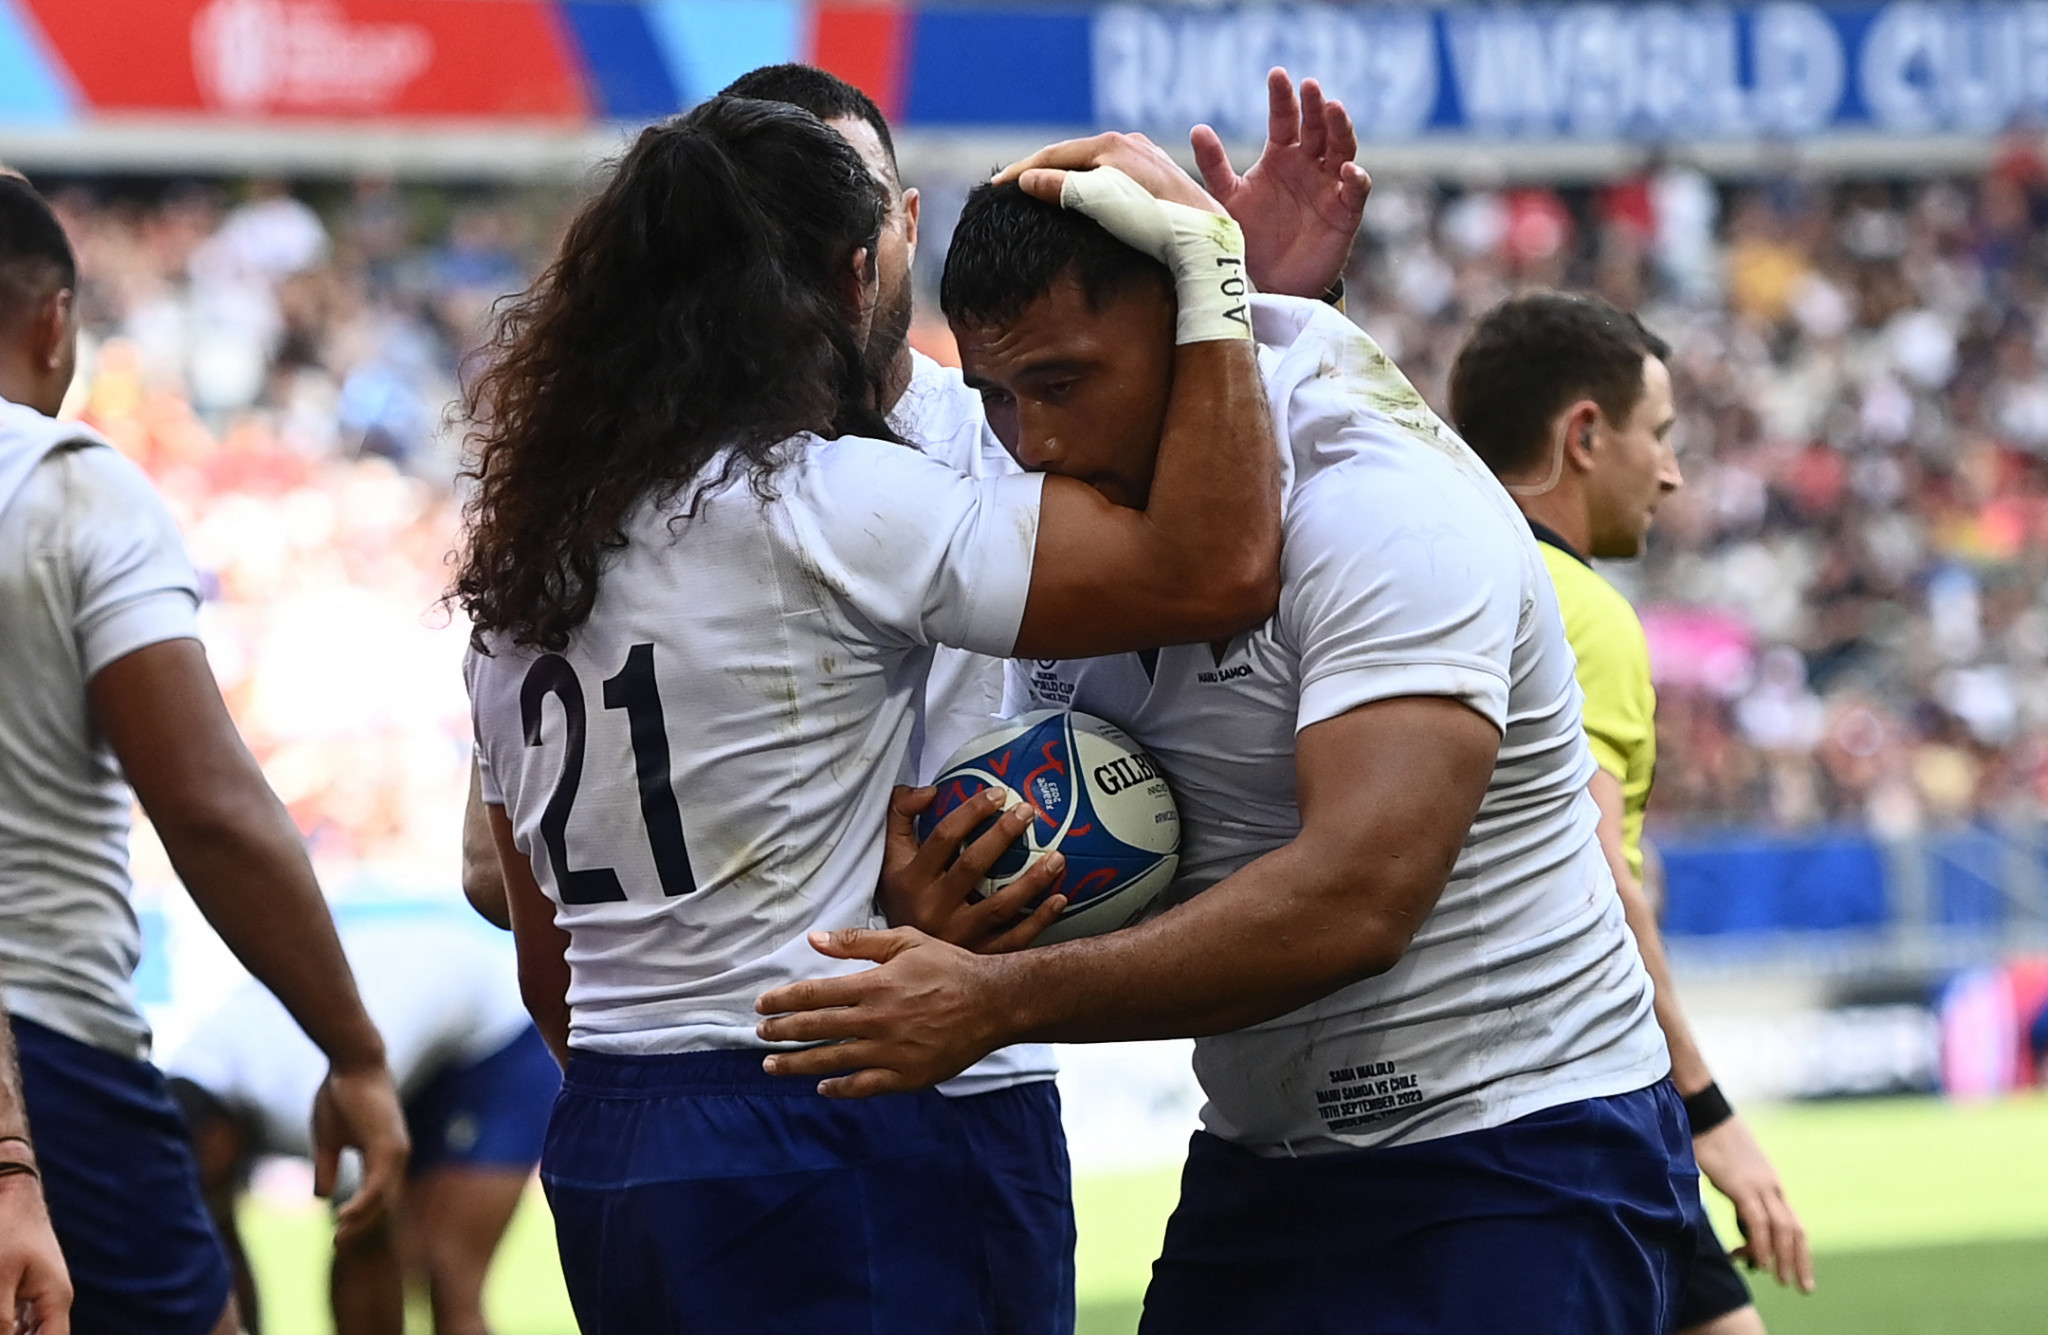 Samoa begin their Rugby World Cup campaign with bonus-point win over Chile 